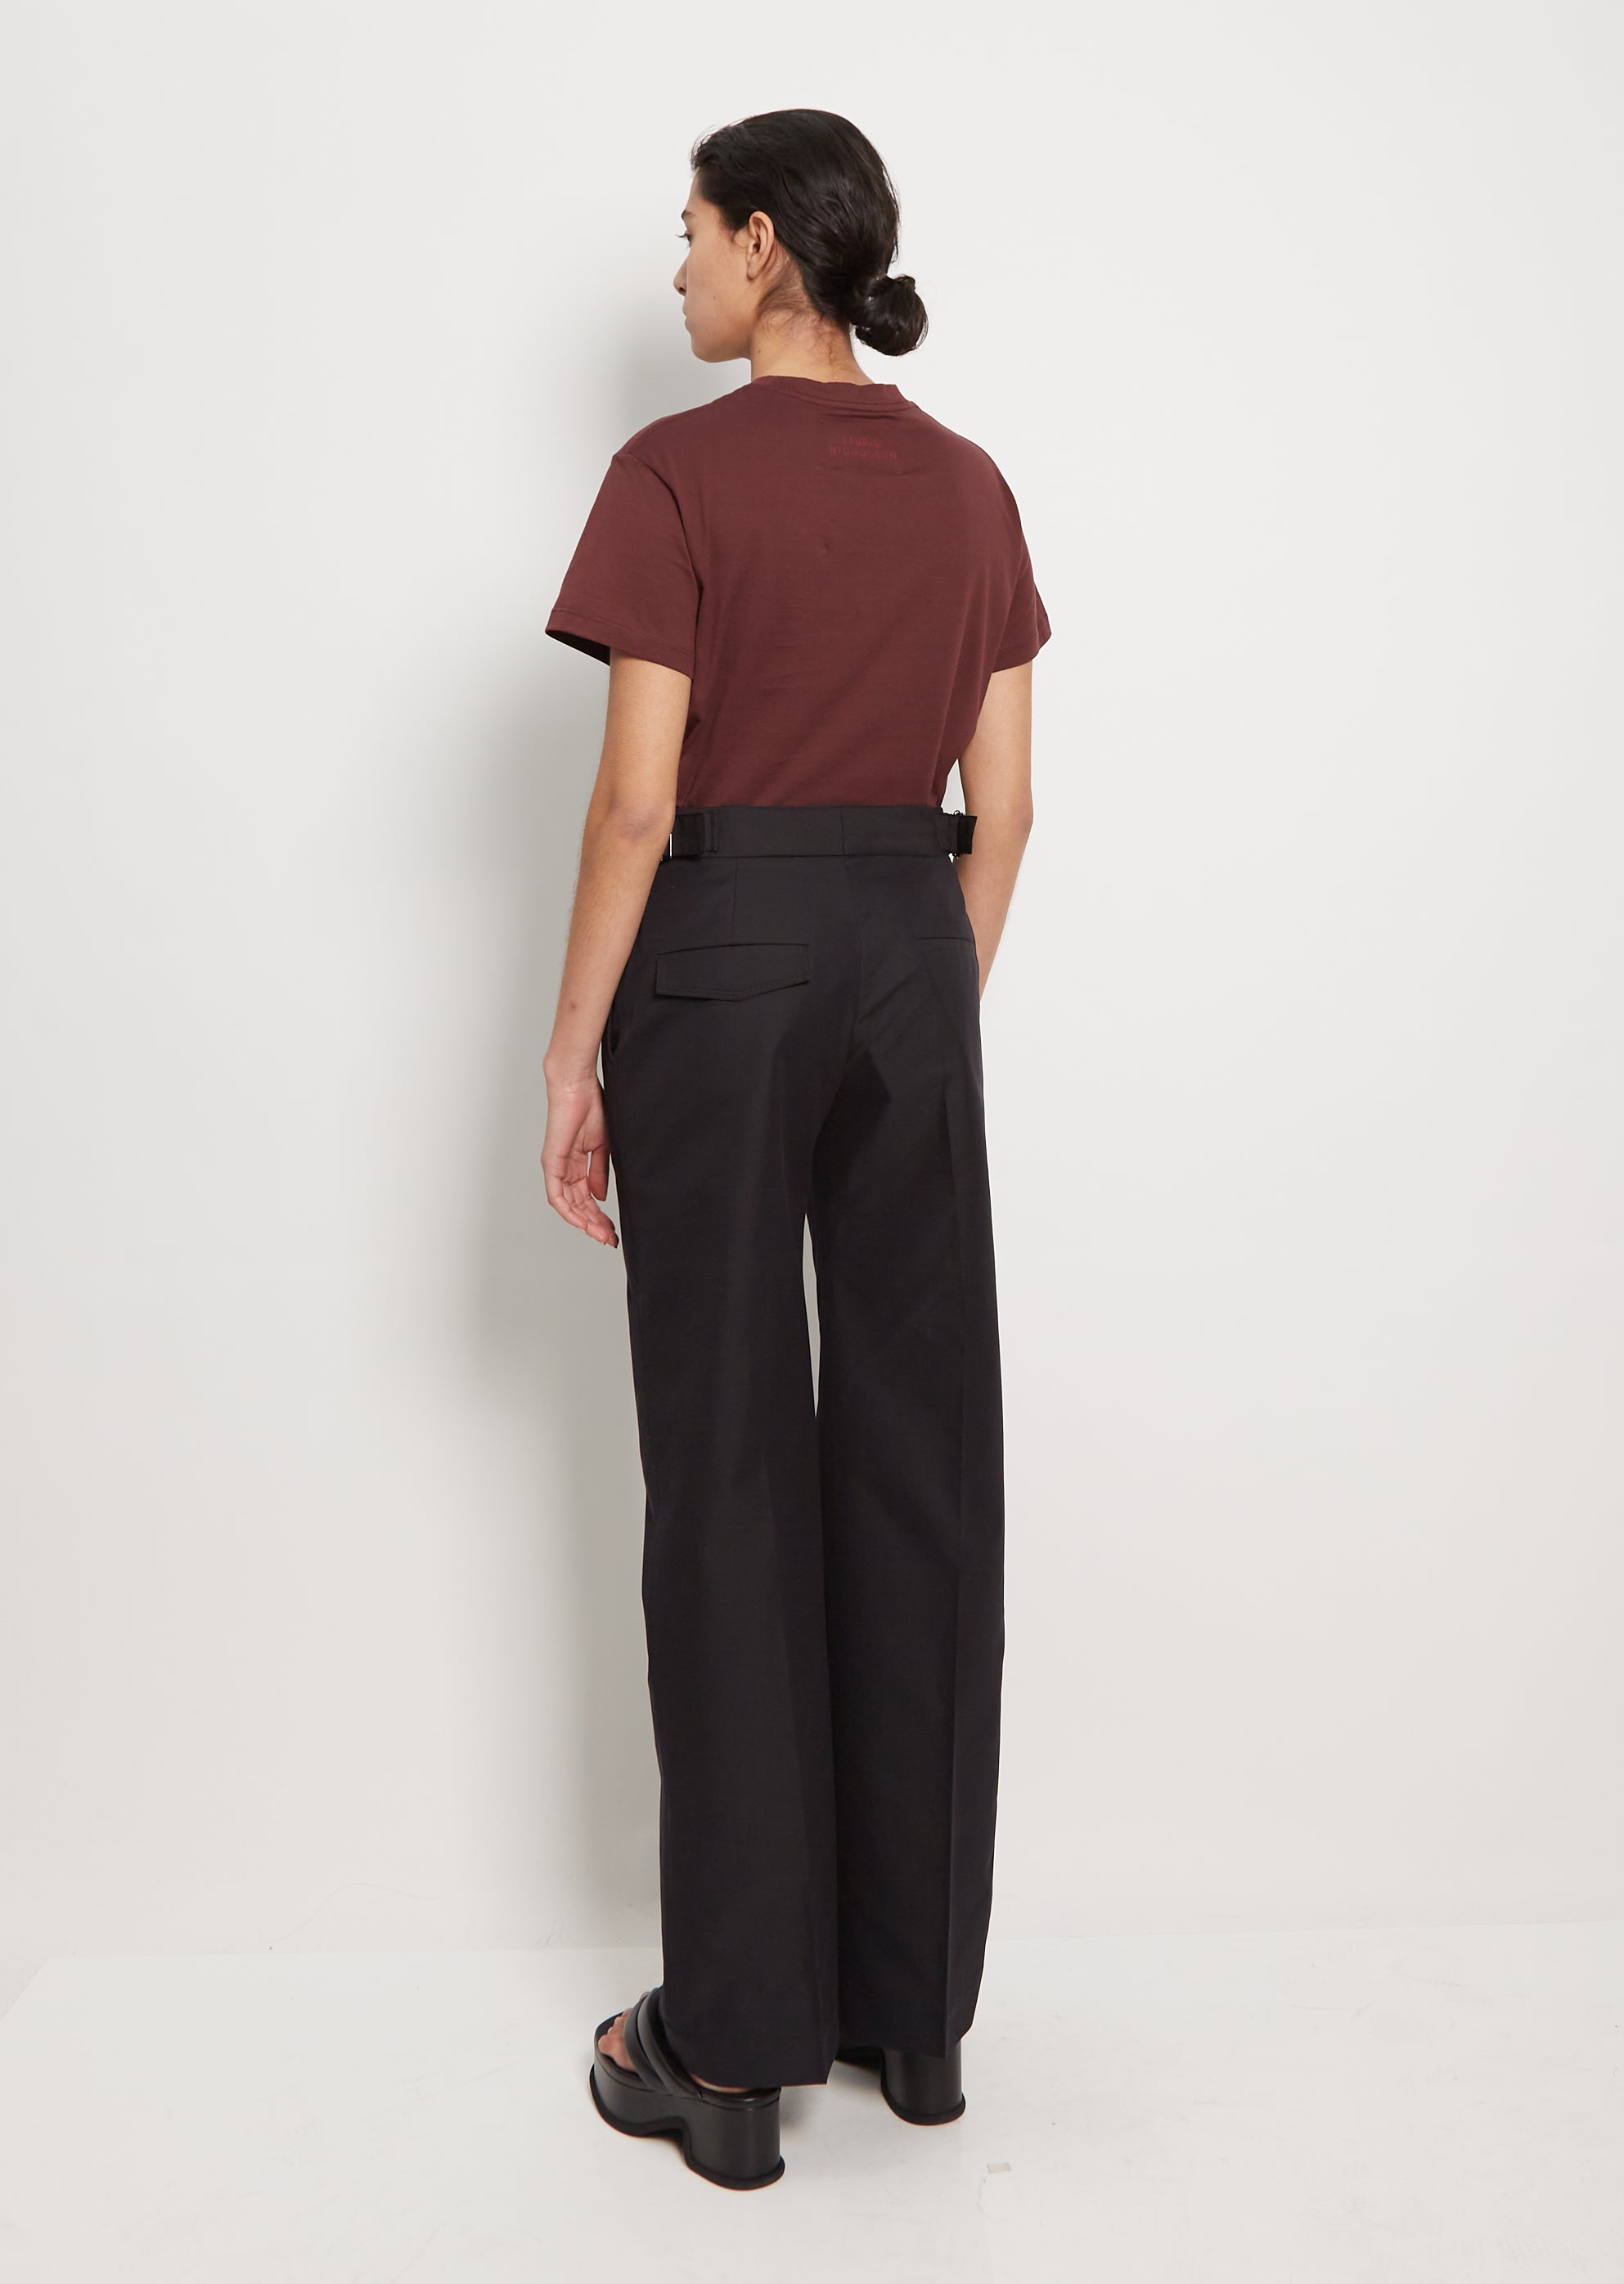 Reynosa Cotton Polyester Straight Trousers - 00 / Black